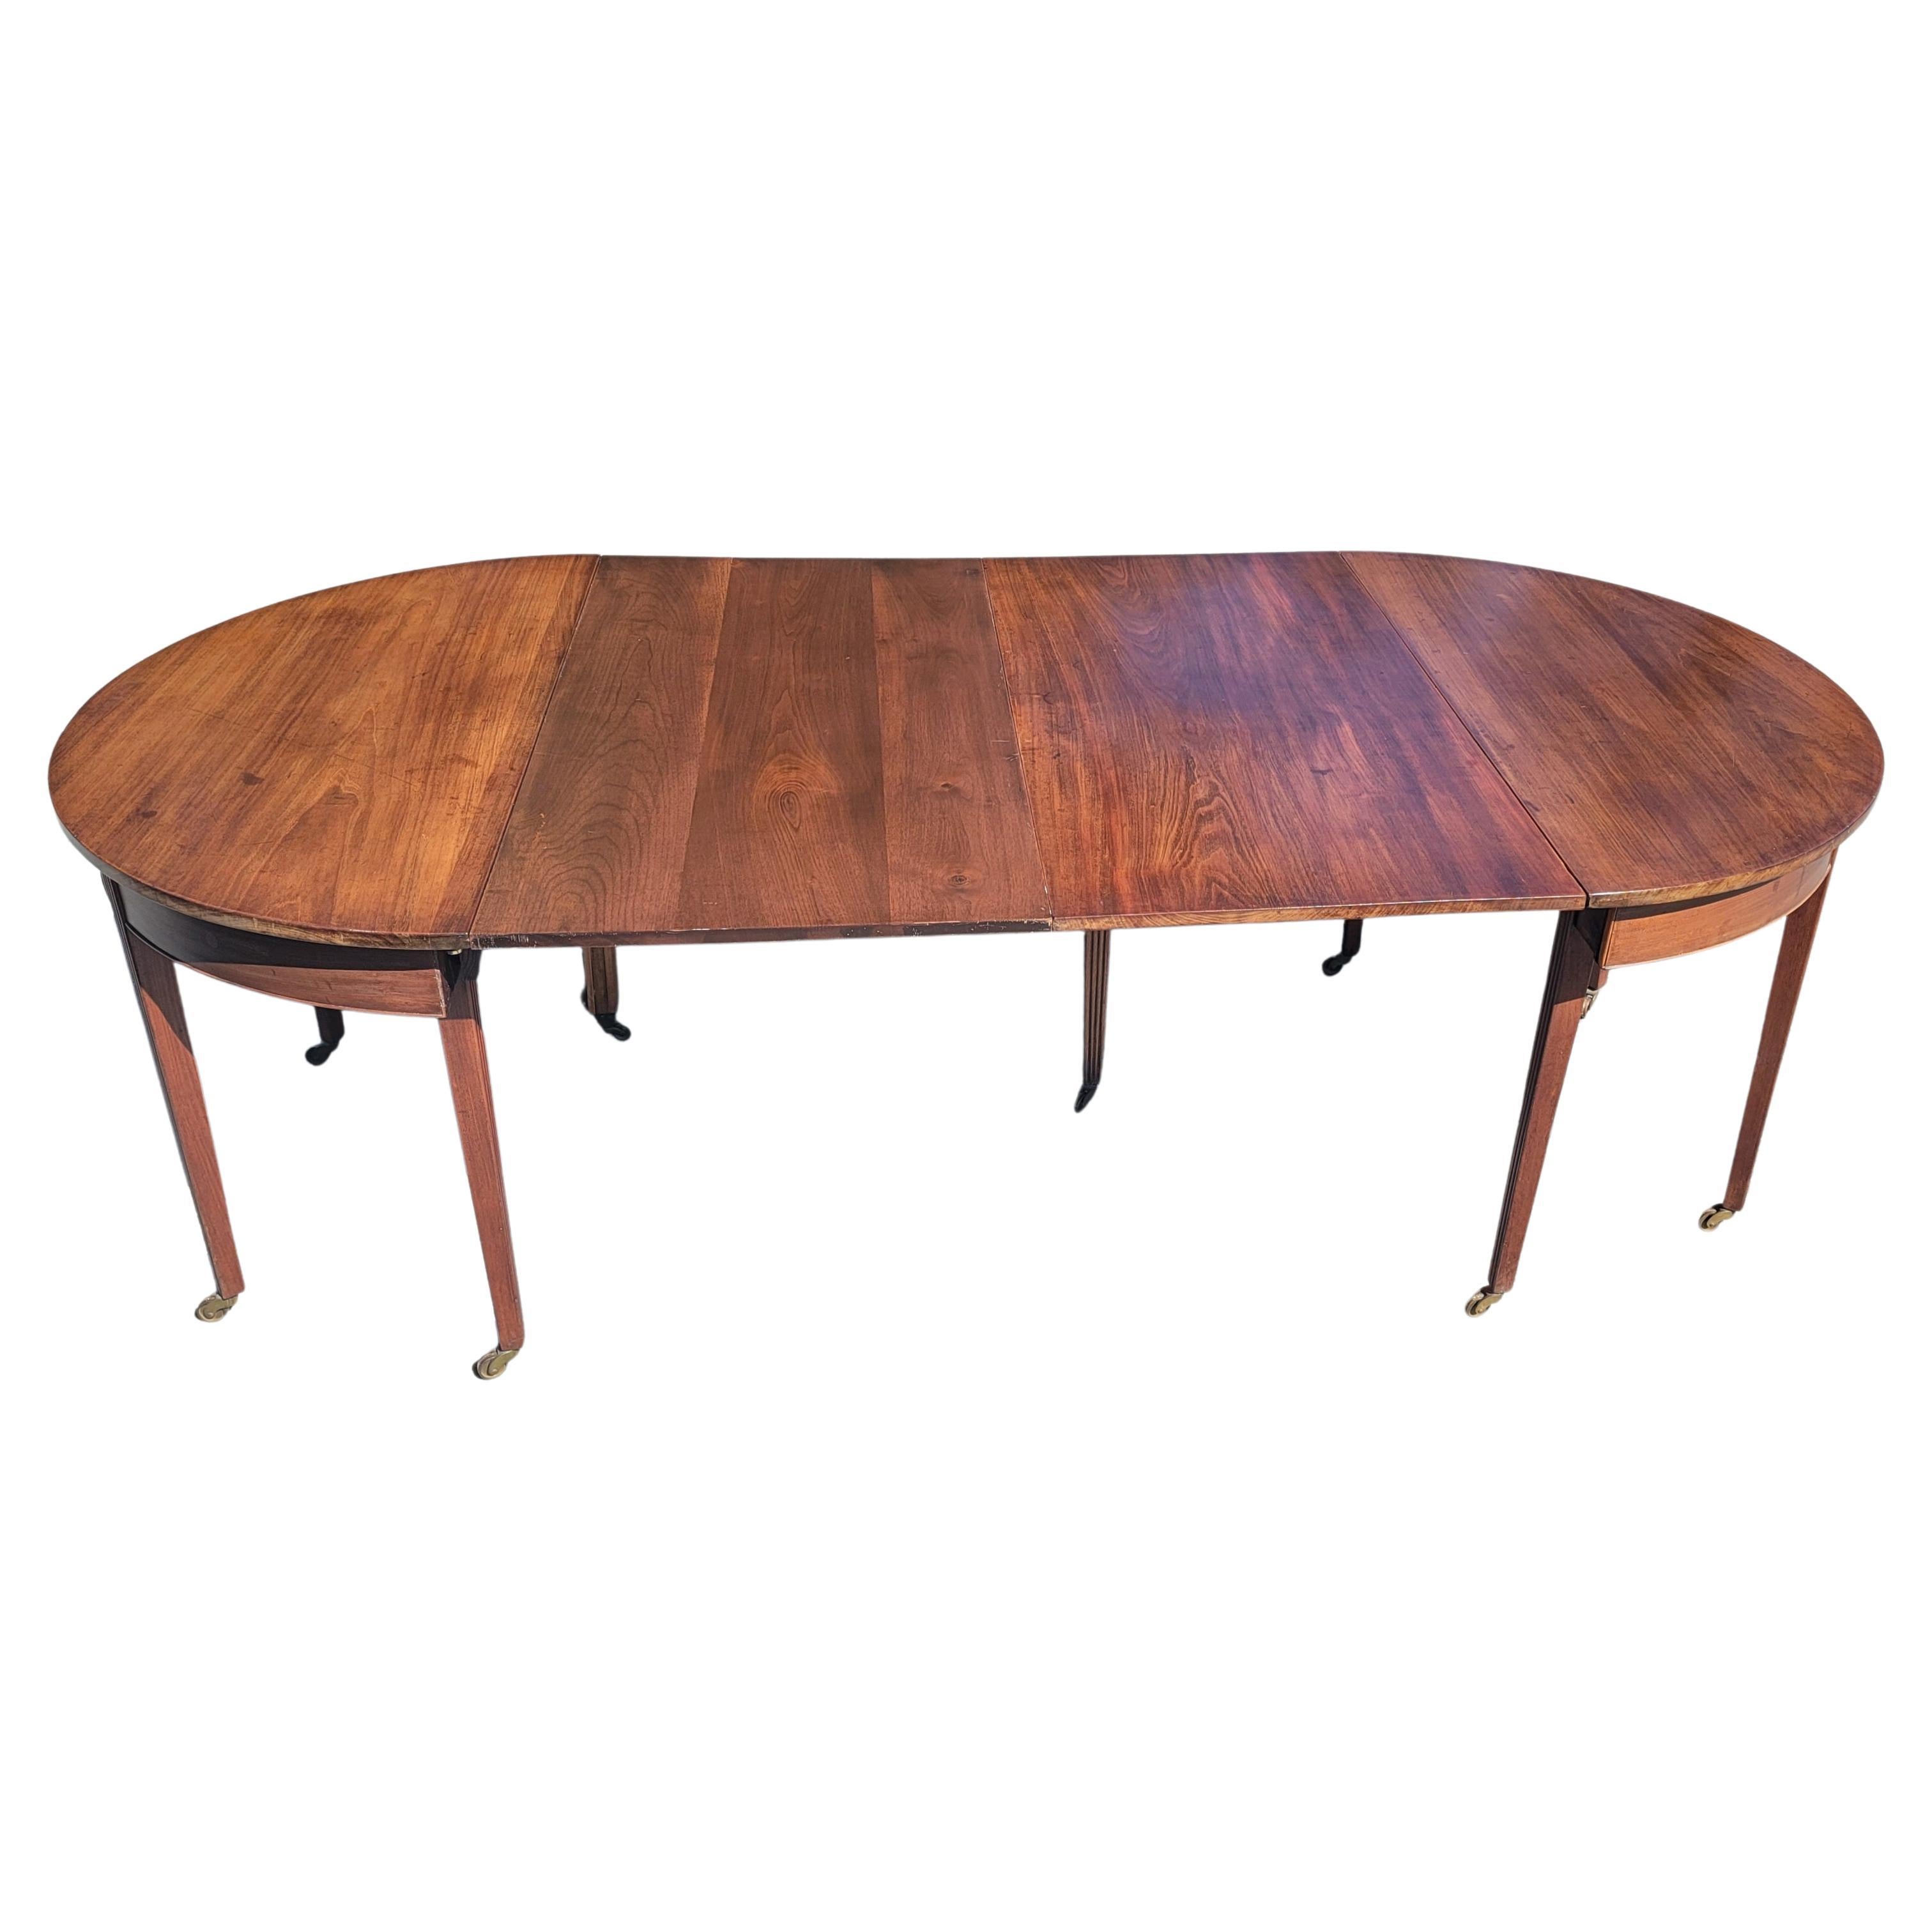 A patinated 10-legged George III style mahogany oval drop leaf extension Dining table on wheels.
Comes with one 24